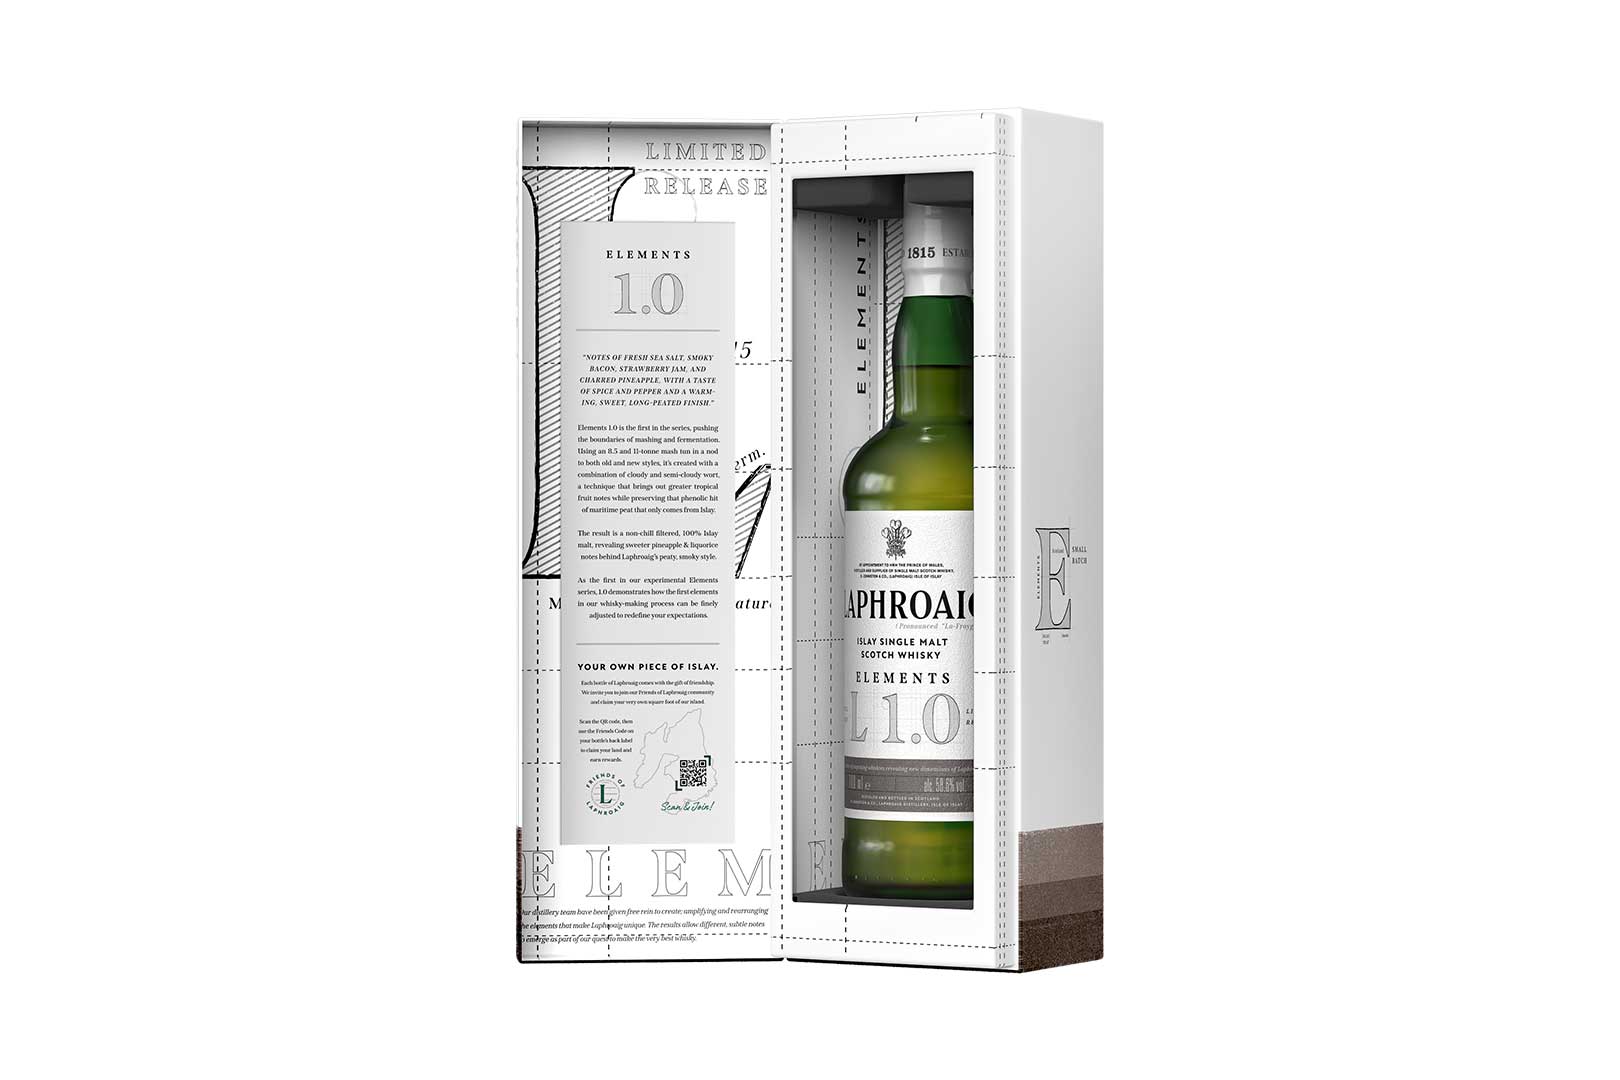 You are currently viewing Laphroaig Elements 1.0